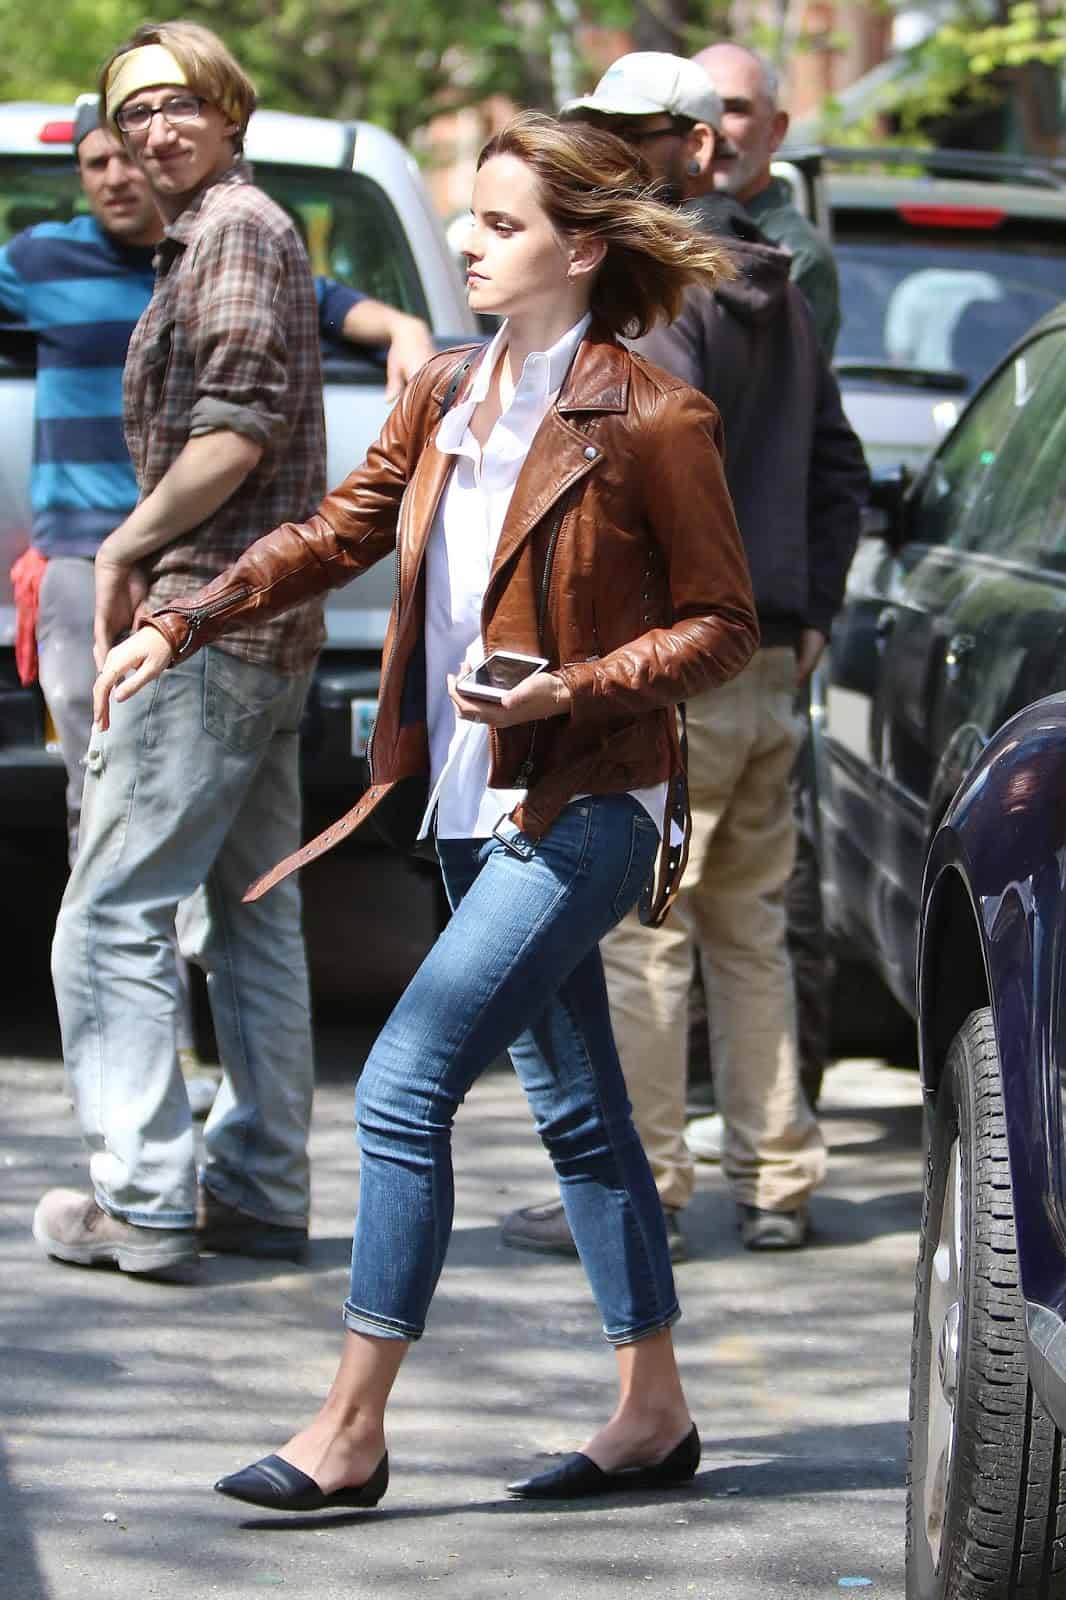 Emma Watson Was a Sensation in a Chic Leather Jacket and Skinny Jeans in NY